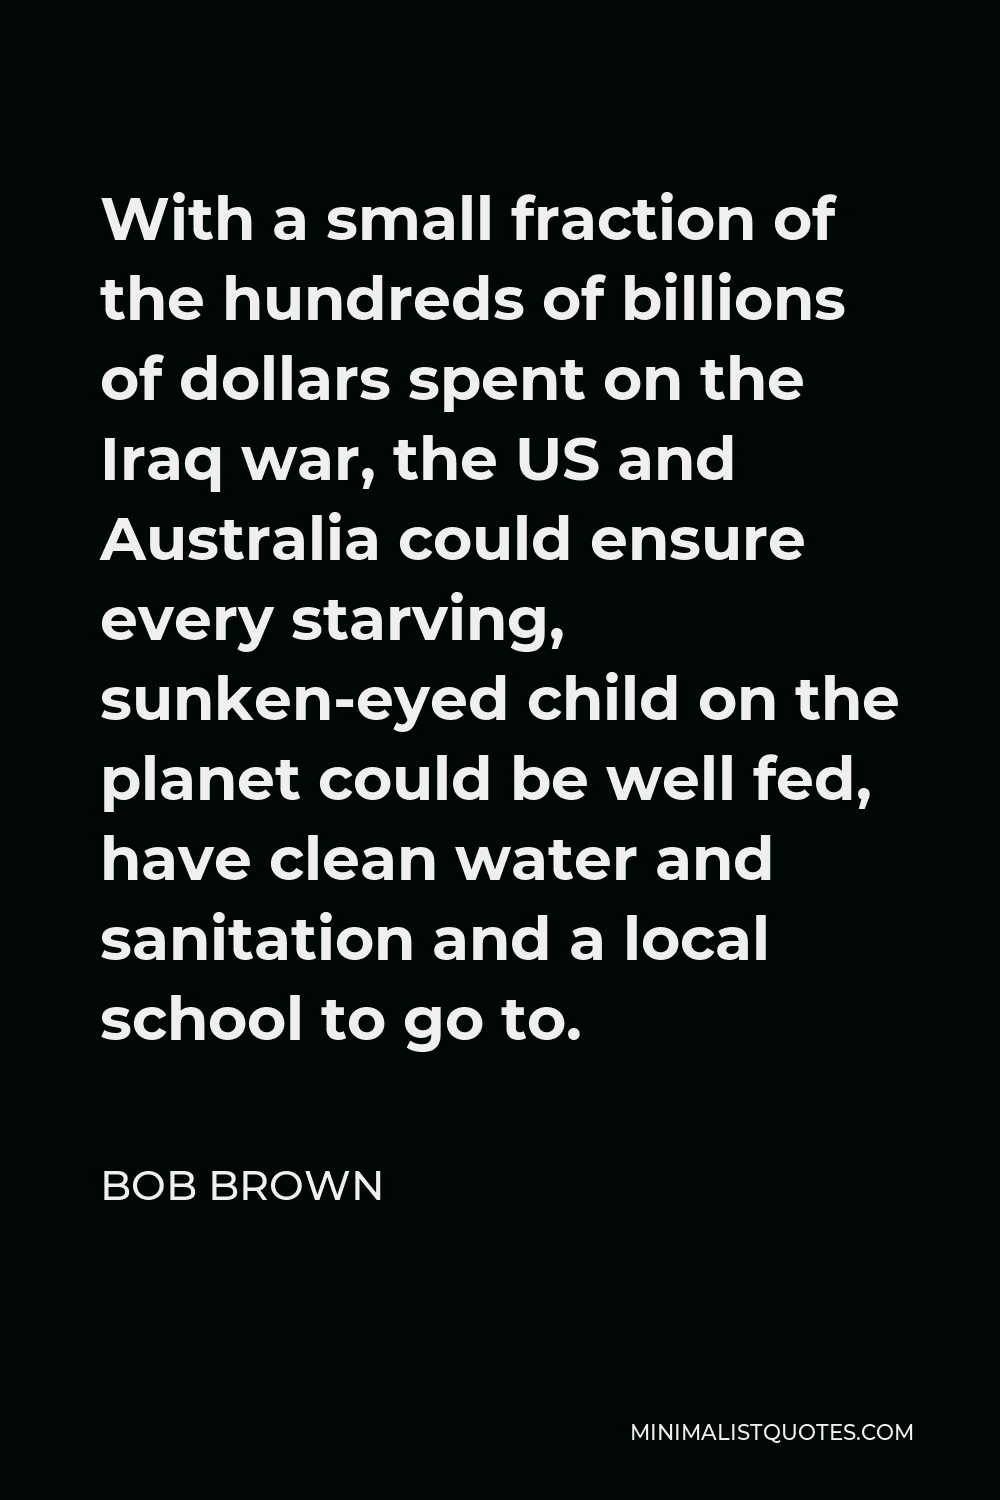 Bob Brown Quote - With a small fraction of the hundreds of billions of dollars spent on the Iraq war, the US and Australia could ensure every starving, sunken-eyed child on the planet could be well fed, have clean water and sanitation and a local school to go to.